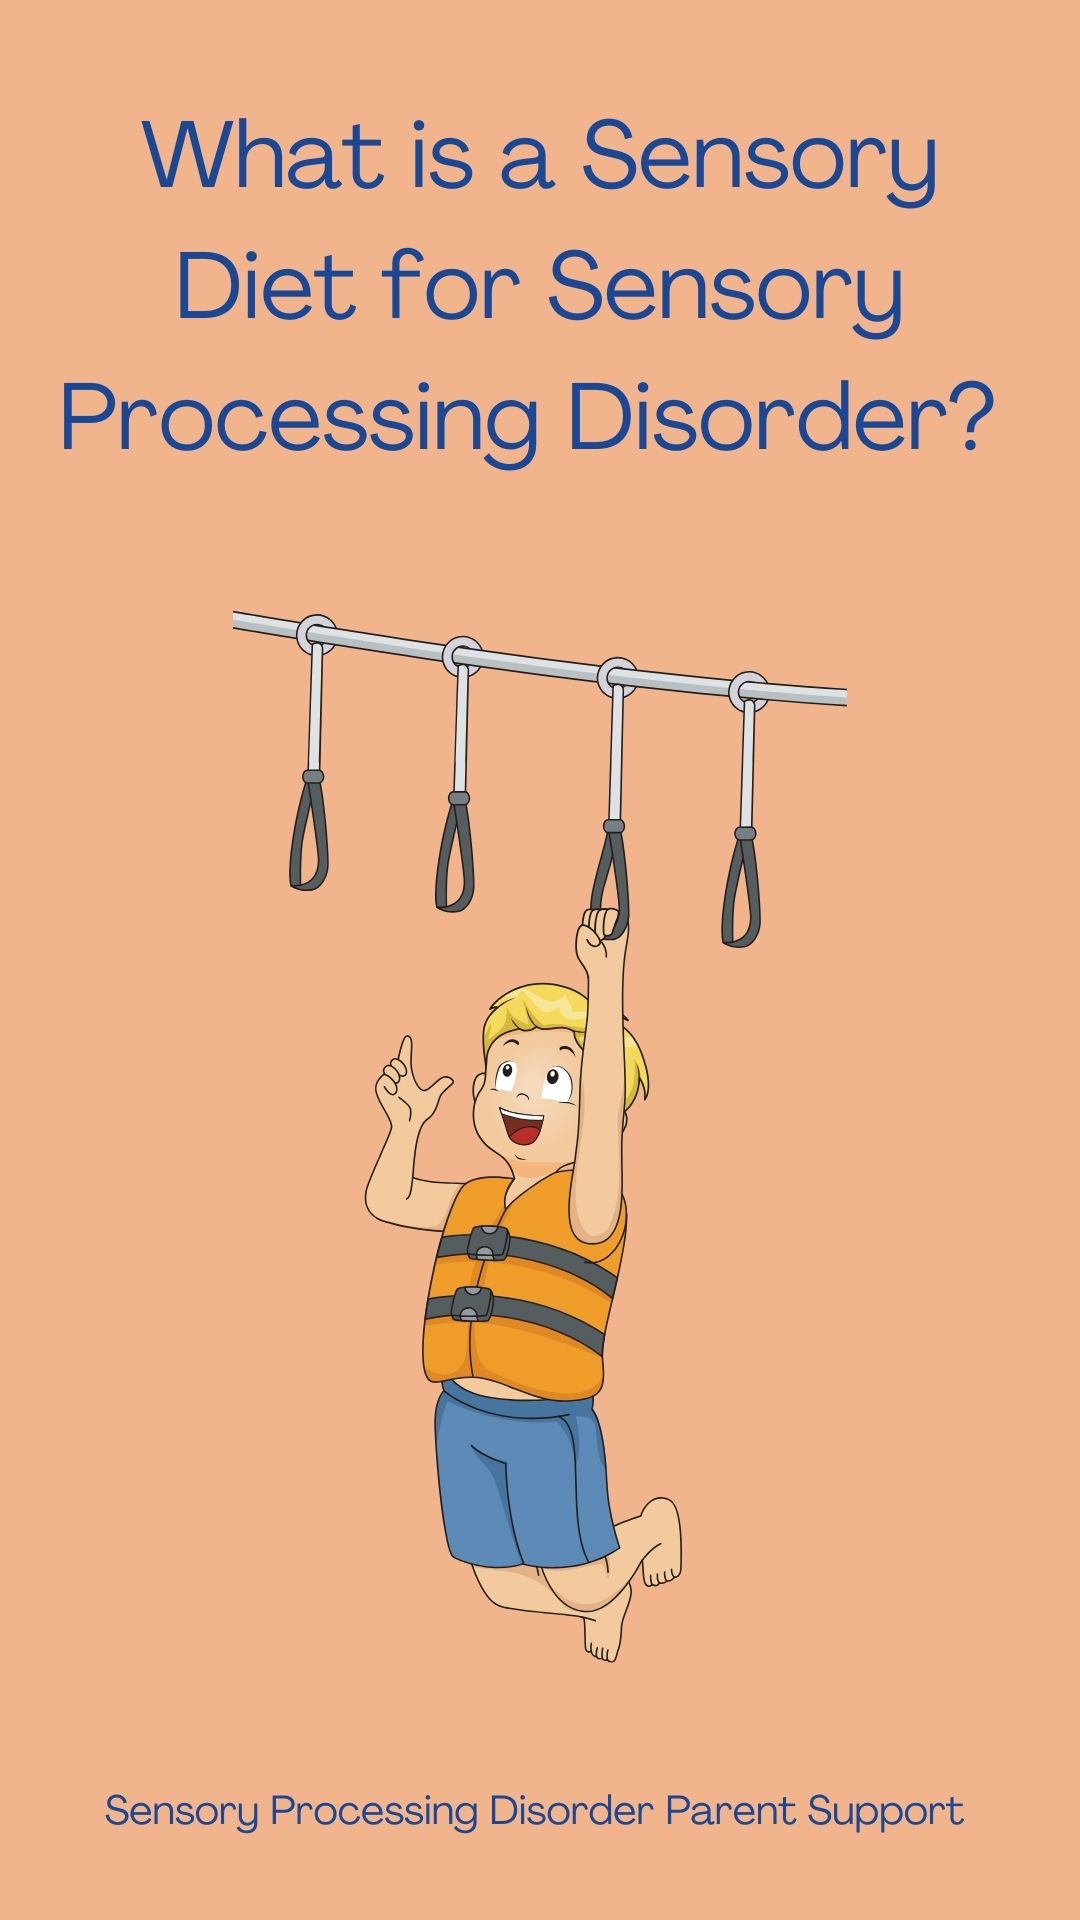 What is a Sensory Diet for Sensory Processing Disorder?